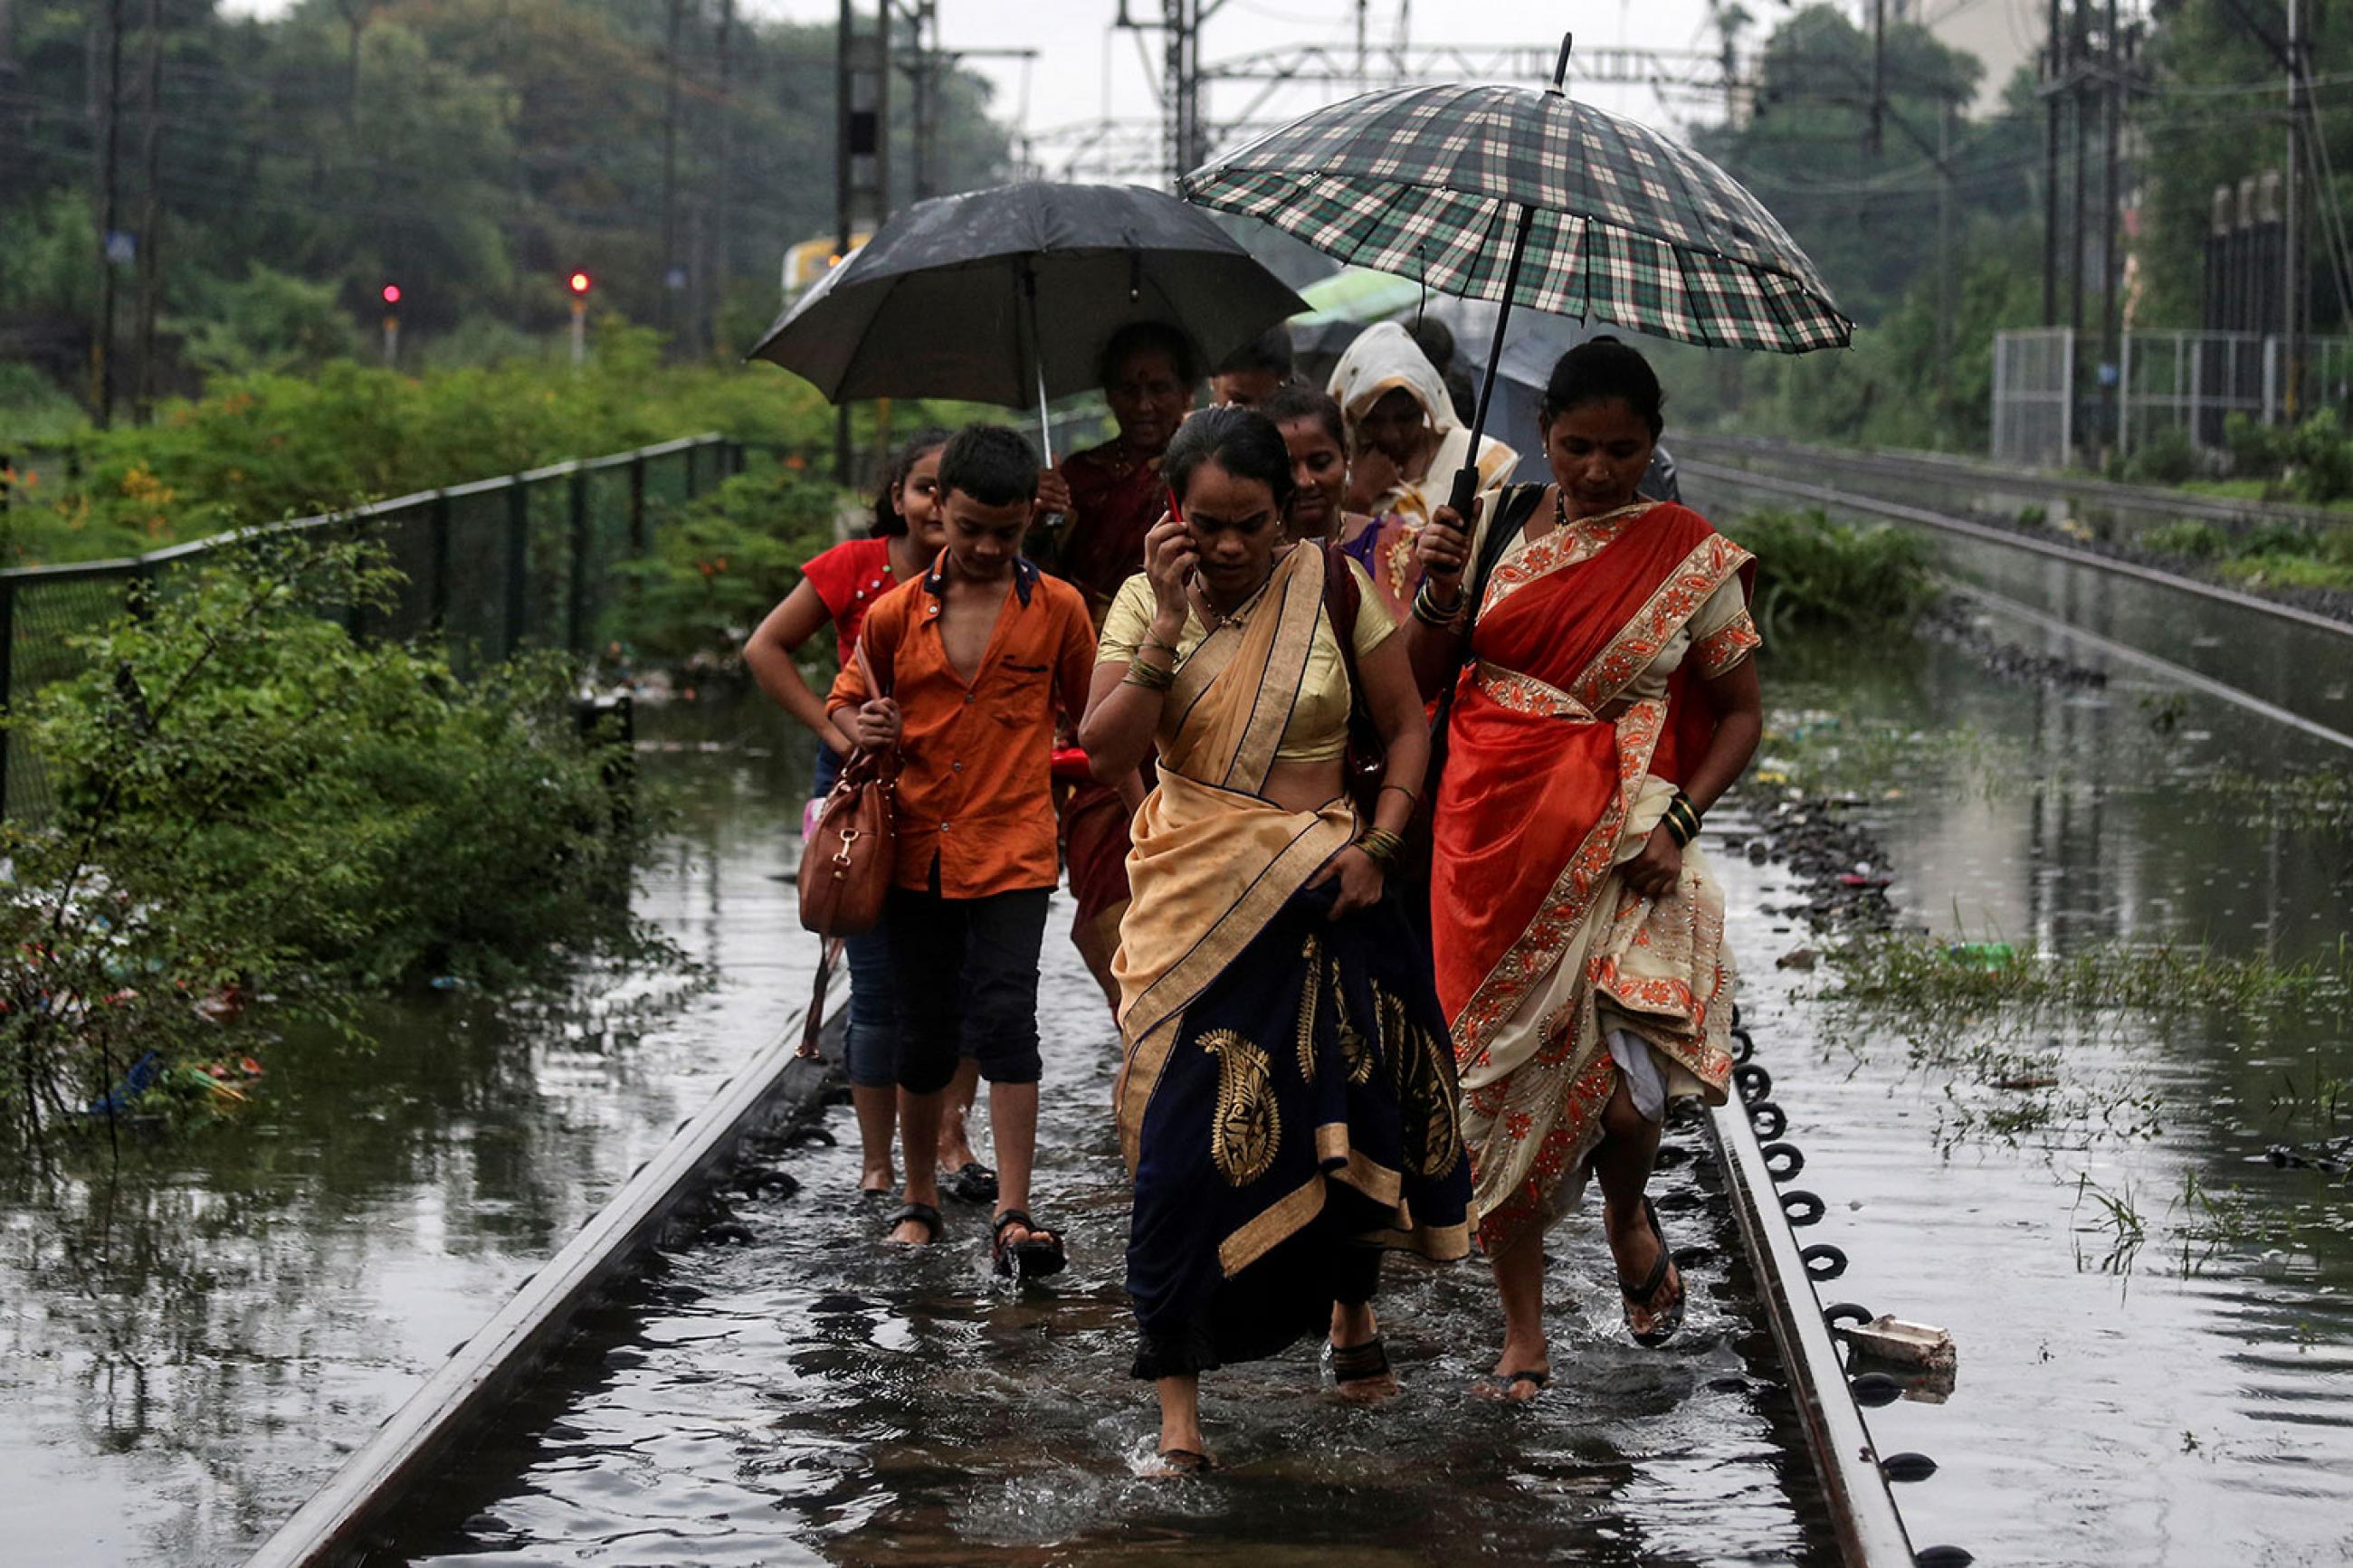 Commuters walk on waterlogged railway tracks after getting off a stalled train during heavy monsoon rains in Mumbai, India, on July 2, 2019. Several women and at least one boy are walking in a group. One of them is talking on a cell phone. Several are sharing umbrellas. The water, even on the train tracks, which are presumably slightly elevated, is up to their ankles. REUTERS/Francis Mascarenhas